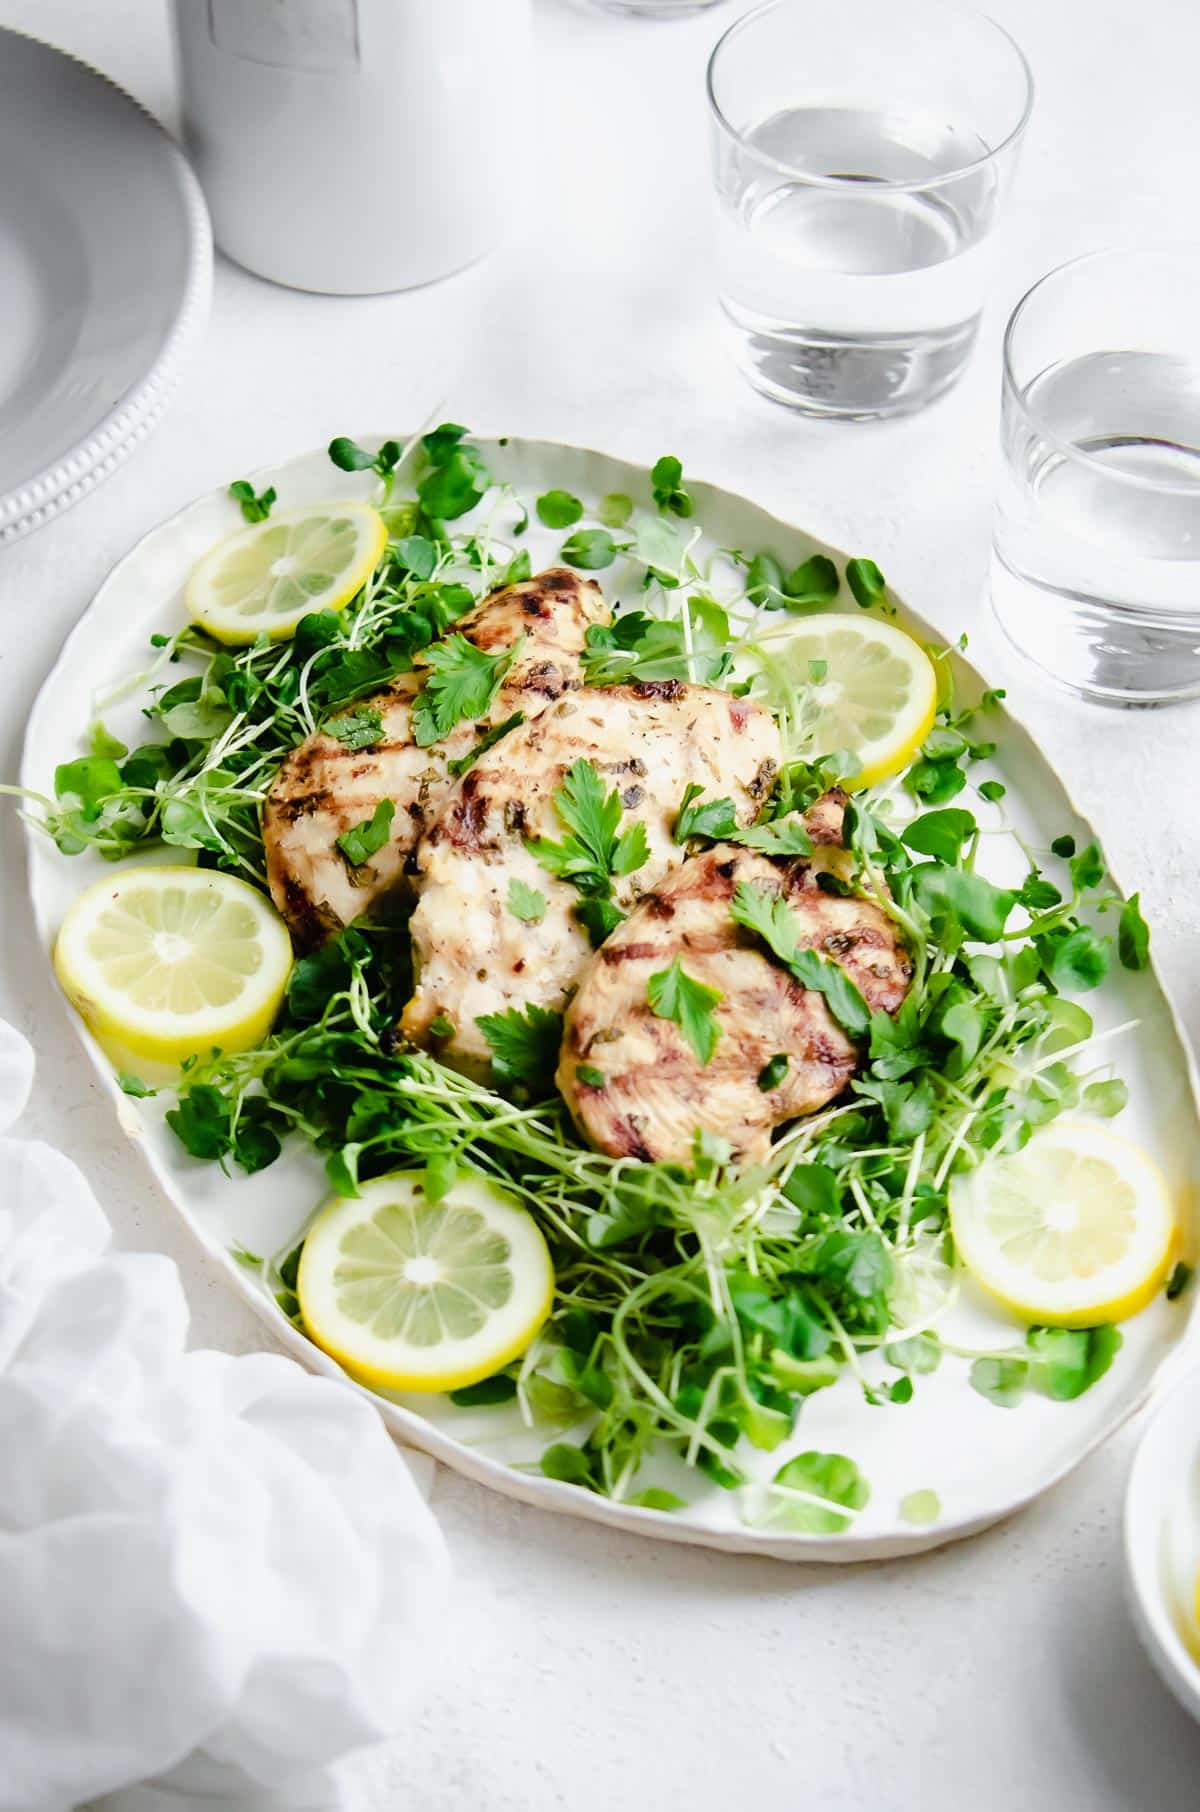 Platter of grilled chicken breast over a bed of greens and garnished with lemons